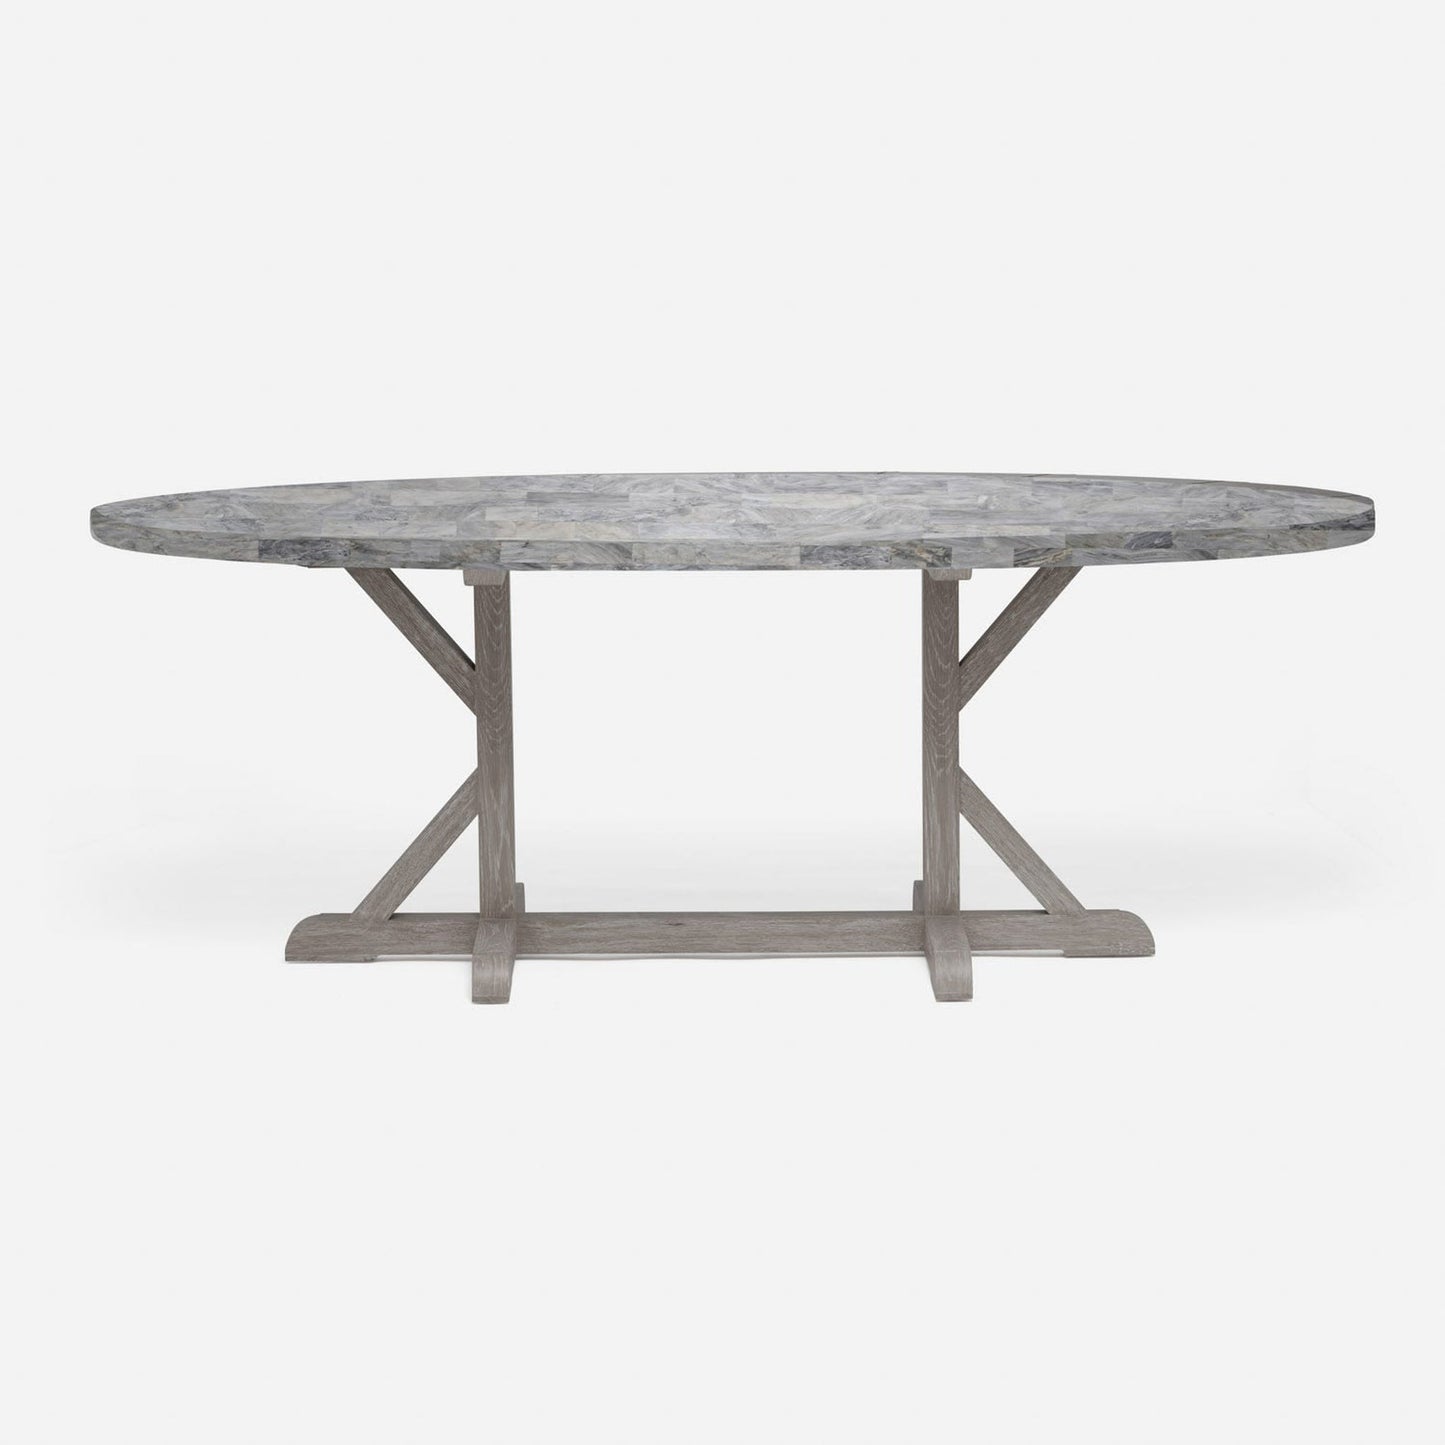 Made Goods Dane 72" x 42" x 30" Gray Cerused Oak Dinning Table With Oval Gray Romblon Stone Table Top